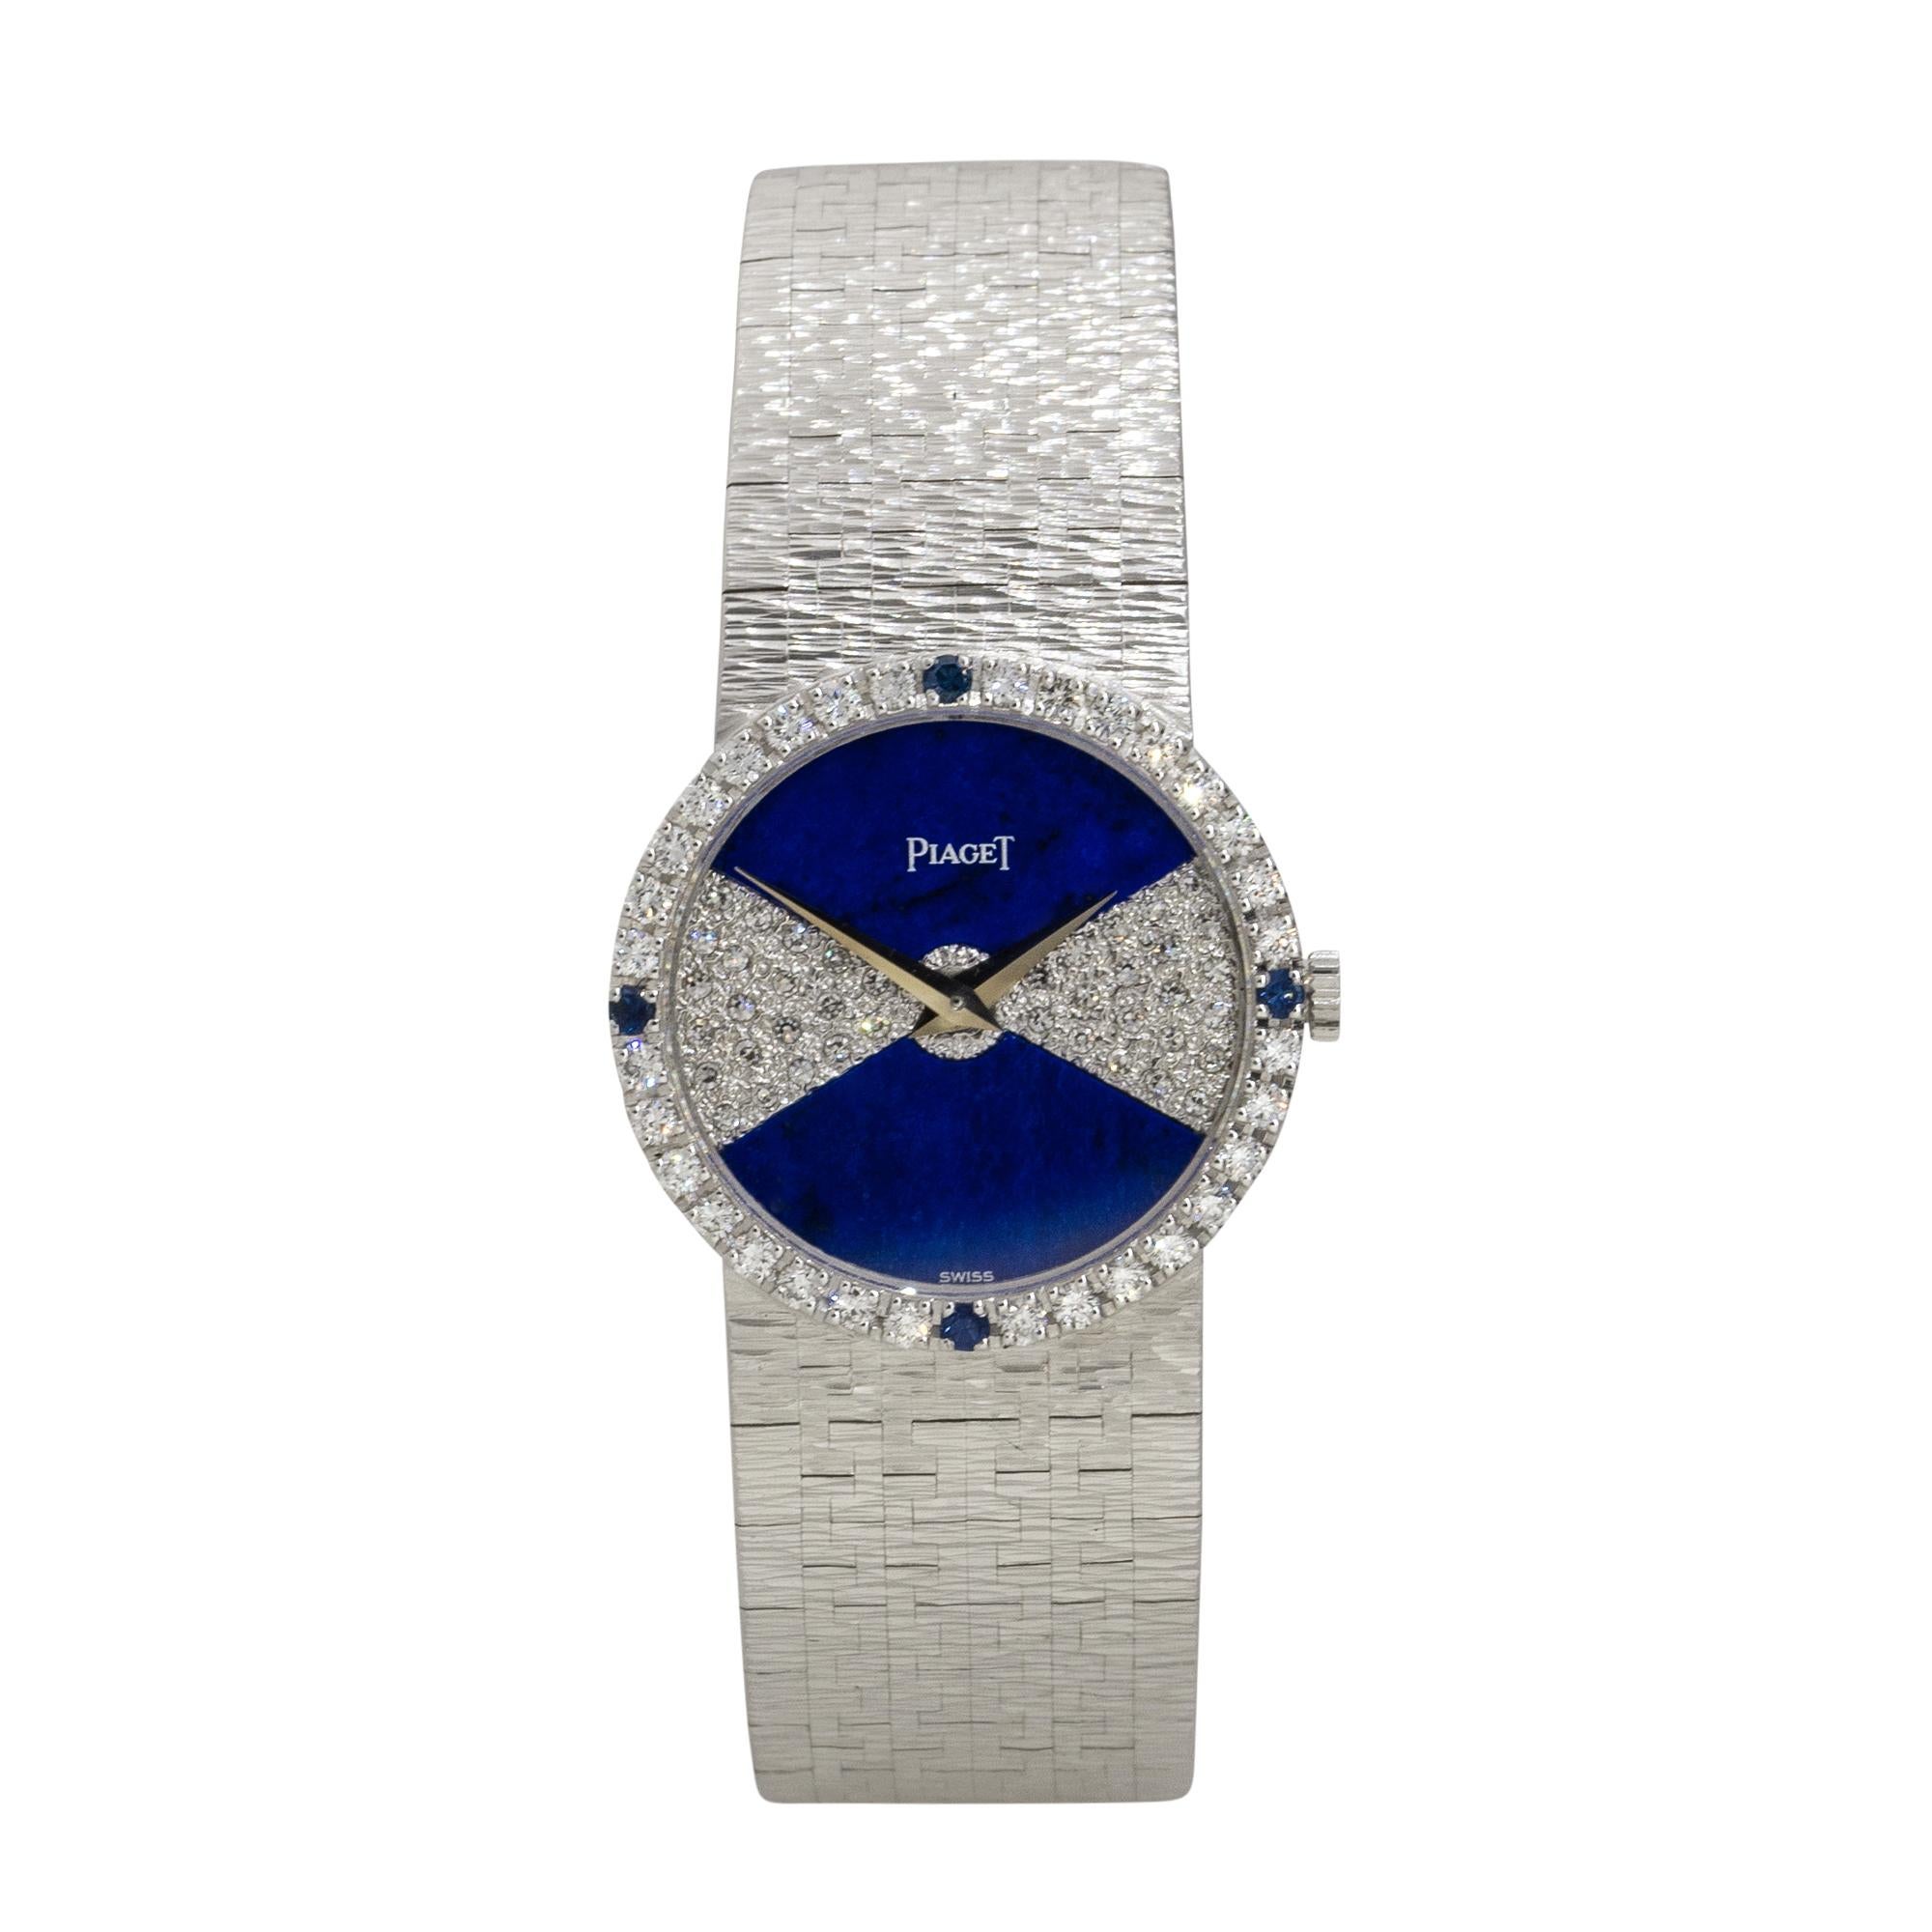 Brand: Piaget
Case Material: 18k White Gold
Case Diameter: 24mm
Crystal: Sapphire Crystal
Bezel: 18k White Gold bezel with Diamonds and Sapphire gemstones
Dial: Blue Lapis dial with silver hands and Diamonds
Bracelet: 18k White Gold
Size: Will fit a